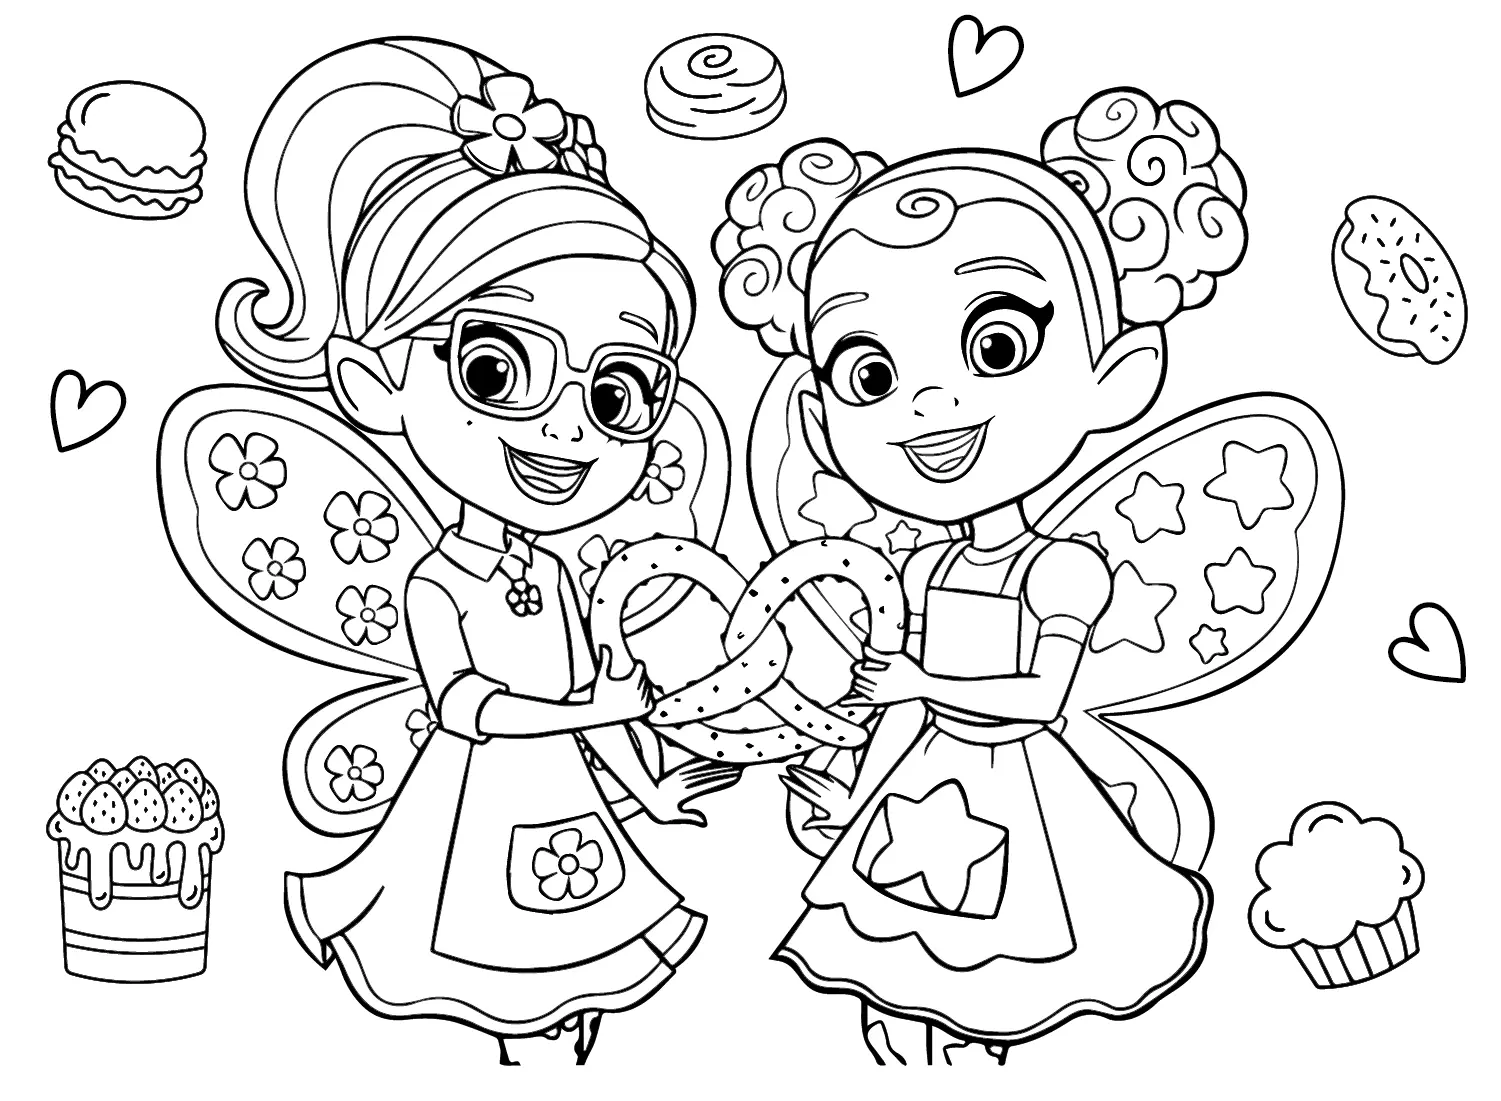 Butterbean s Cafe Coloring Pages